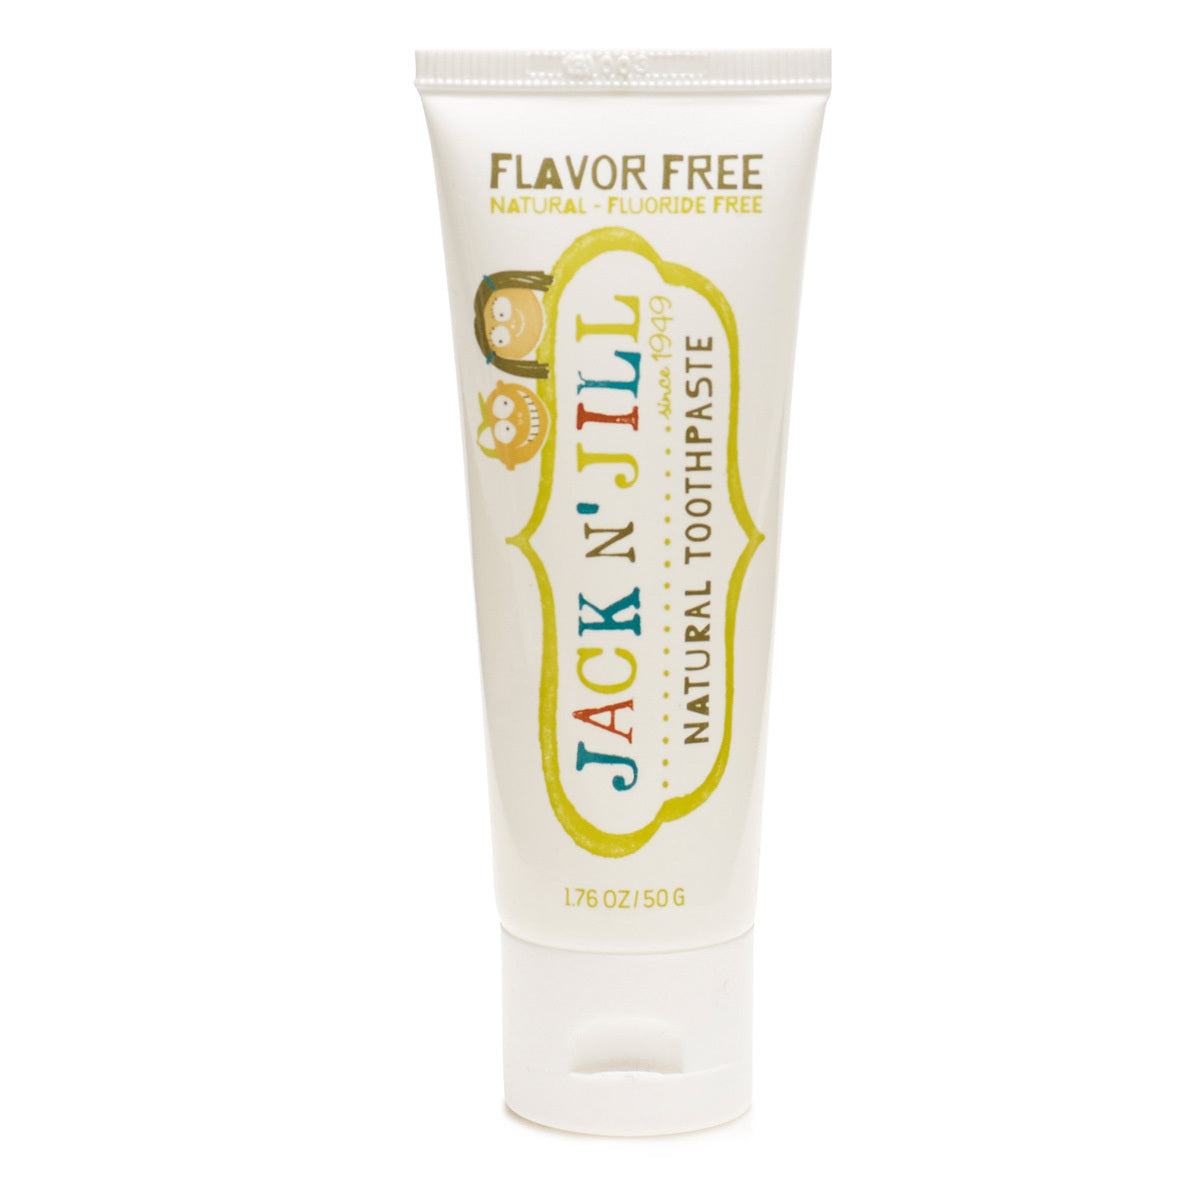 Primary image of Flavor Free Natural Toothpaste